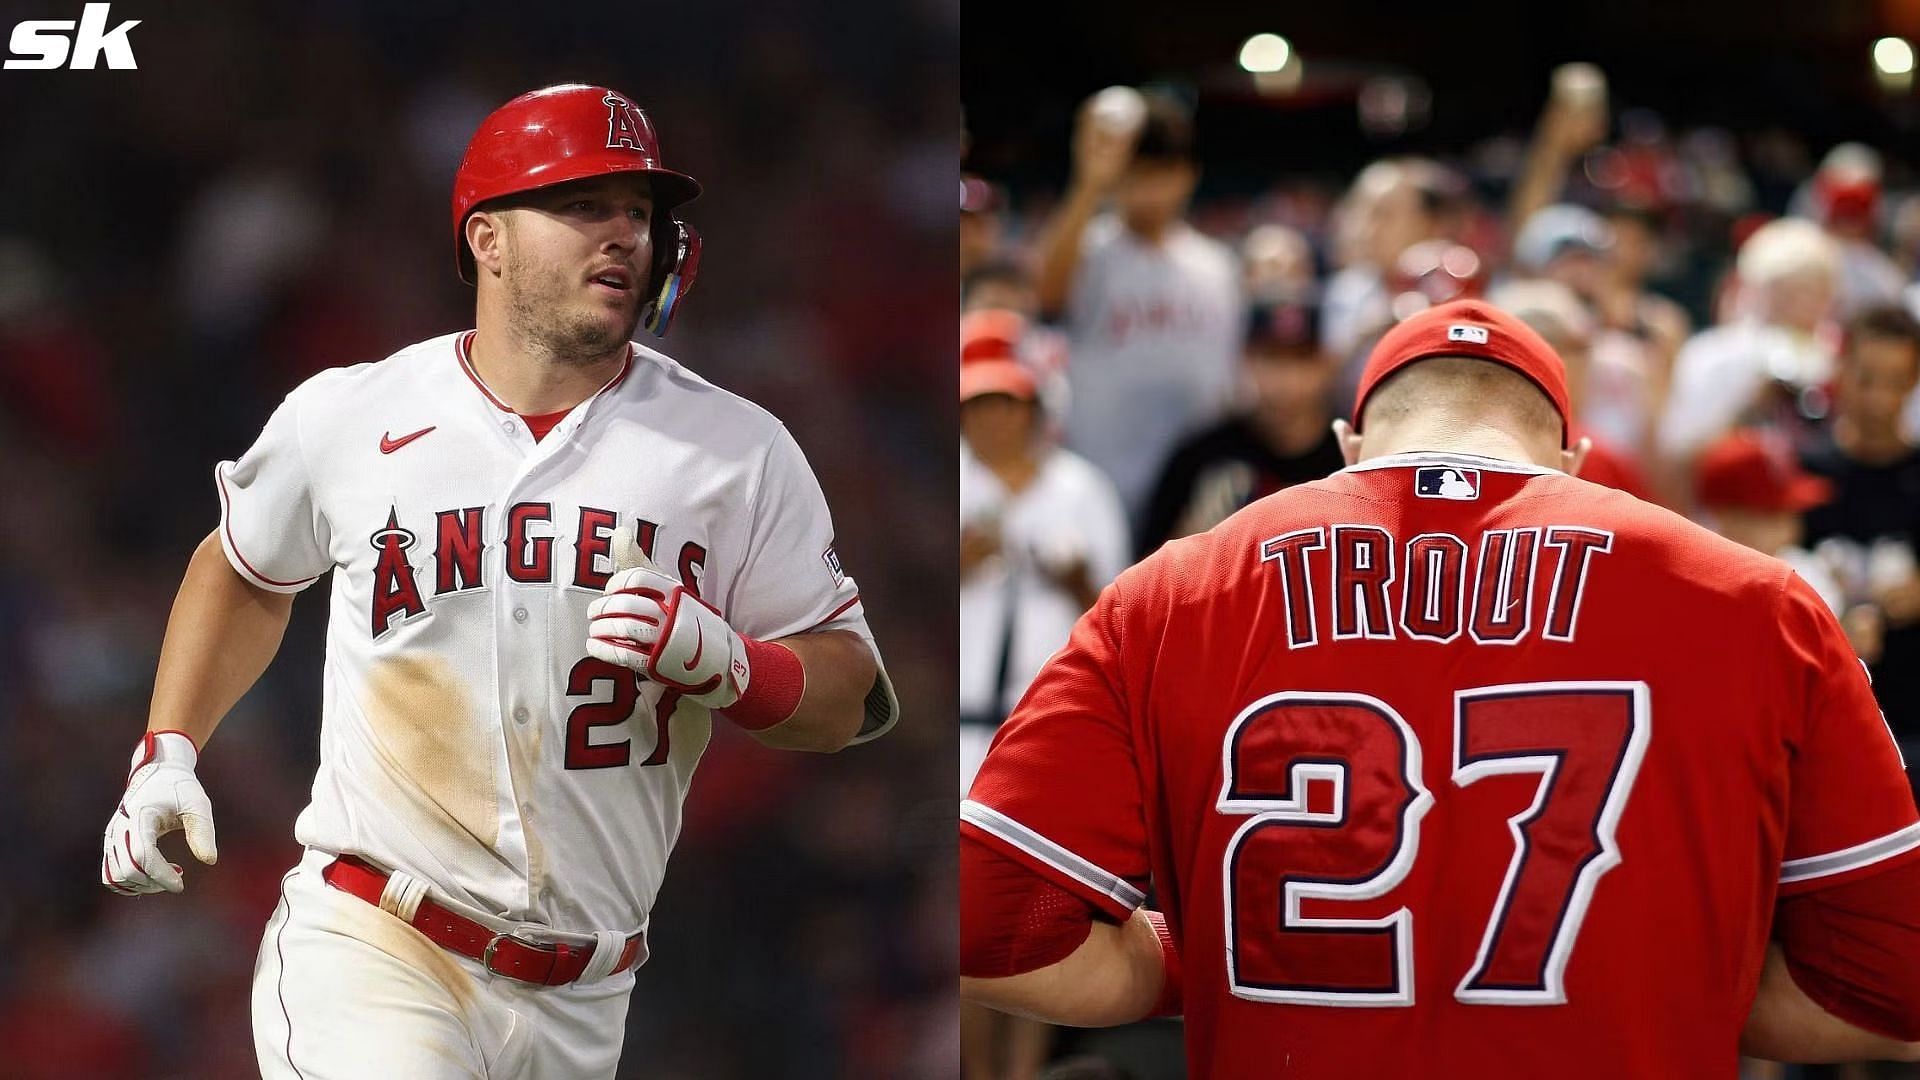 Now pitching: Harper lobbies for Trout to join him in Philadelphia